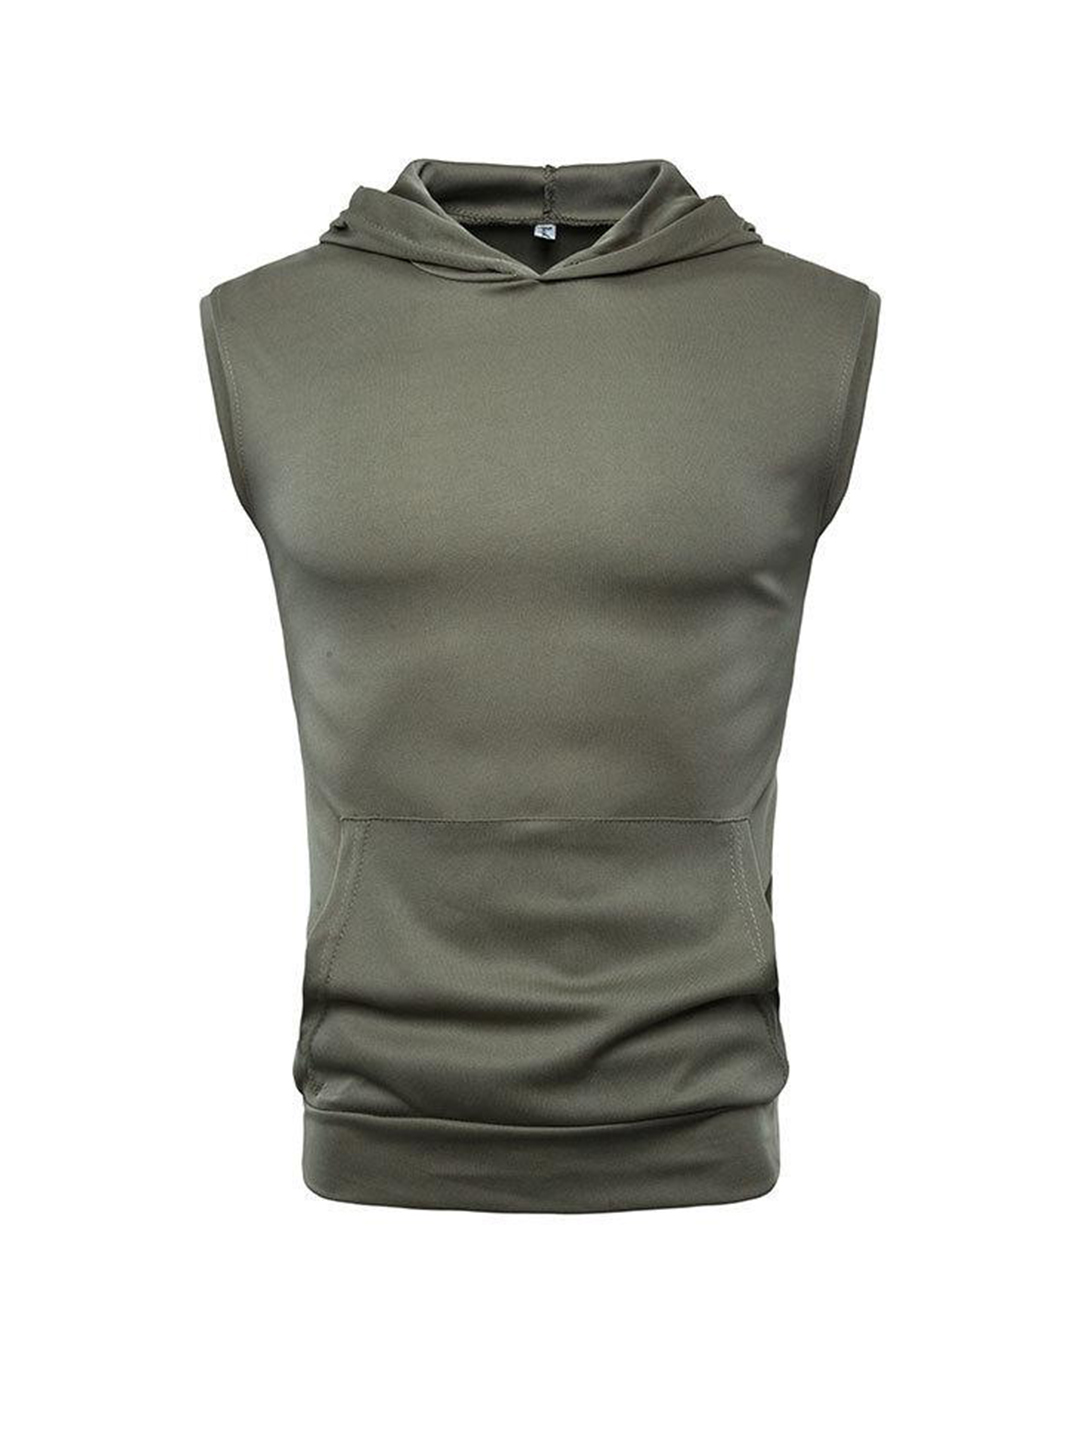 Mackey Solid Color hooded Vest-poisonstreetwear.com